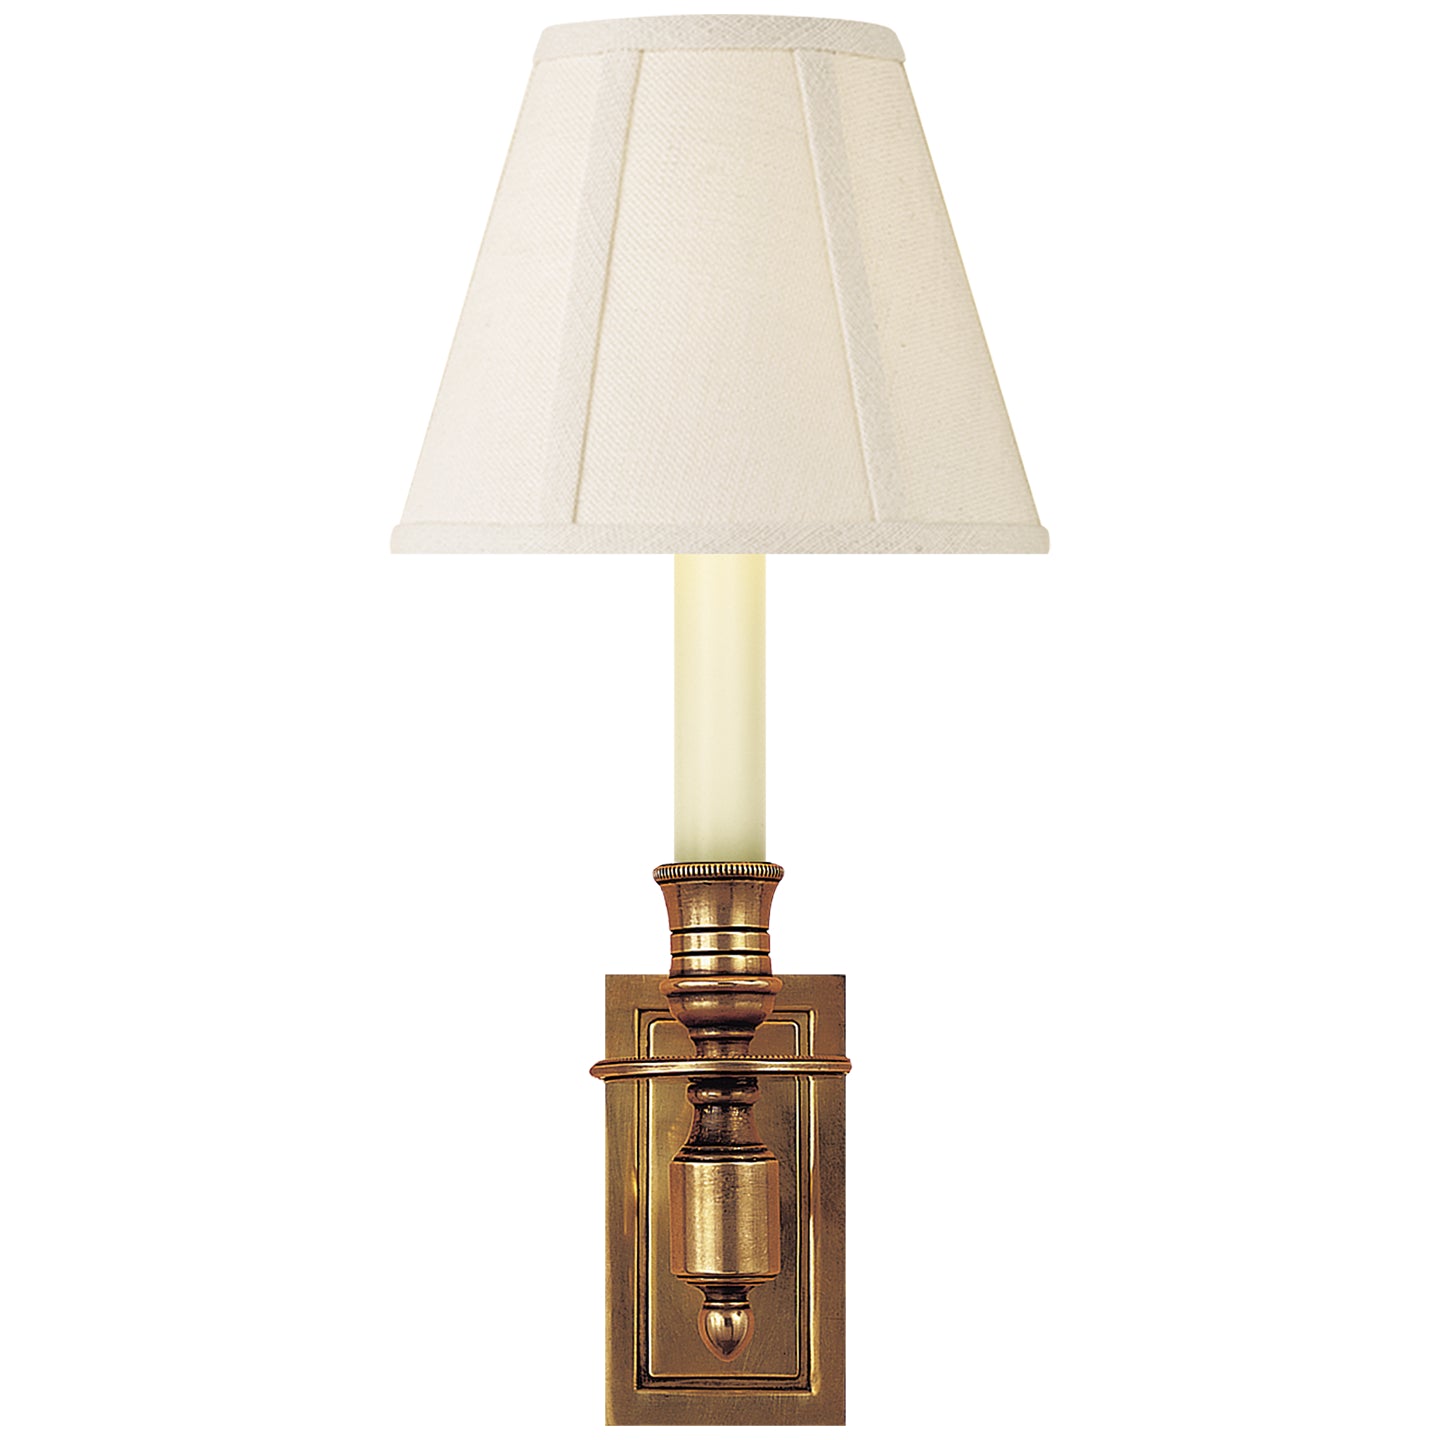 Visual Comfort Signature Canada - One Light Wall Sconce - FRENCH LIBRARY3 —  Union Lighting & Decor